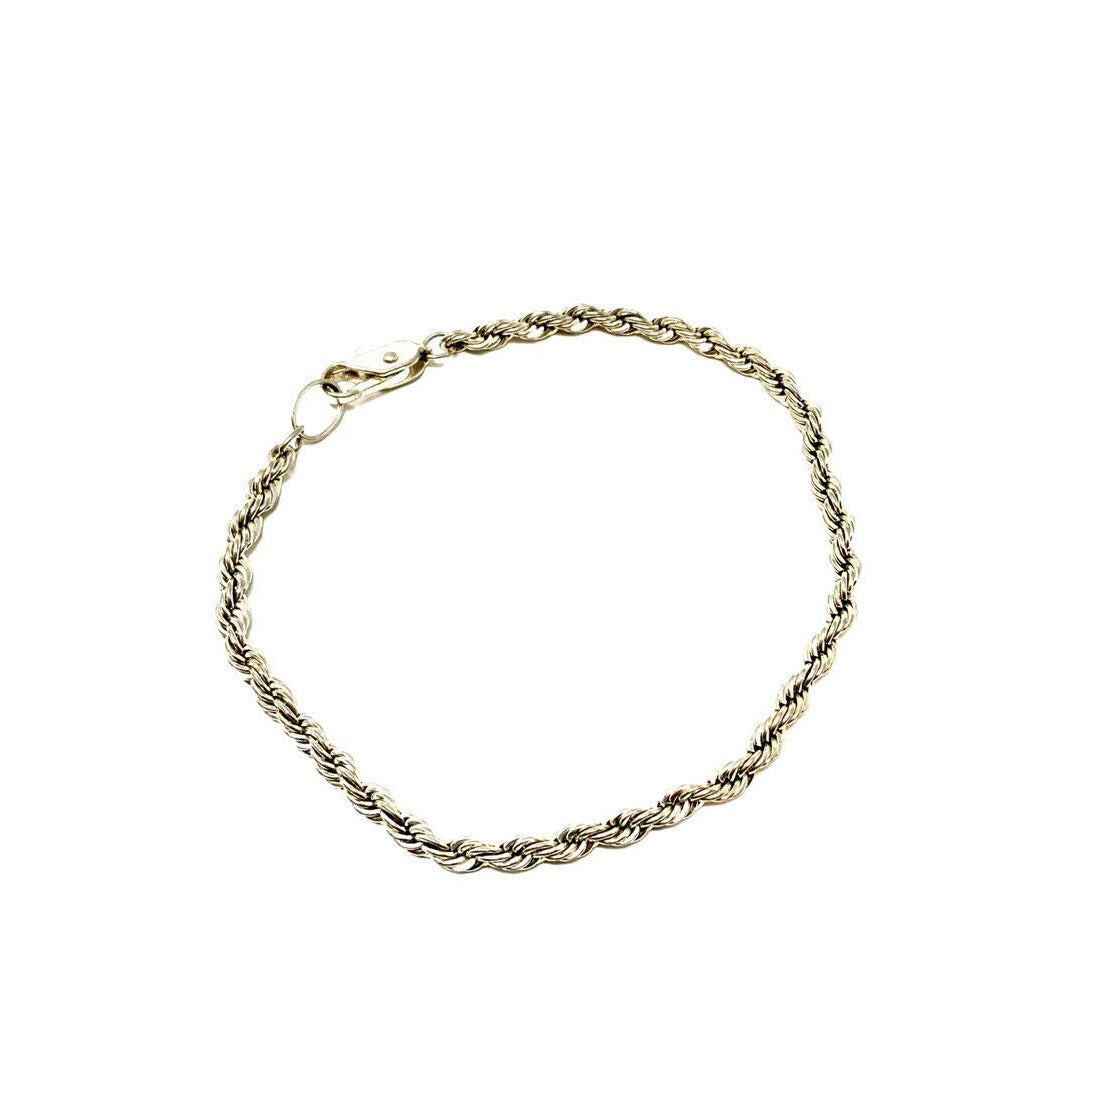 Silver-Tone Twisted Rope Chain Bracelet